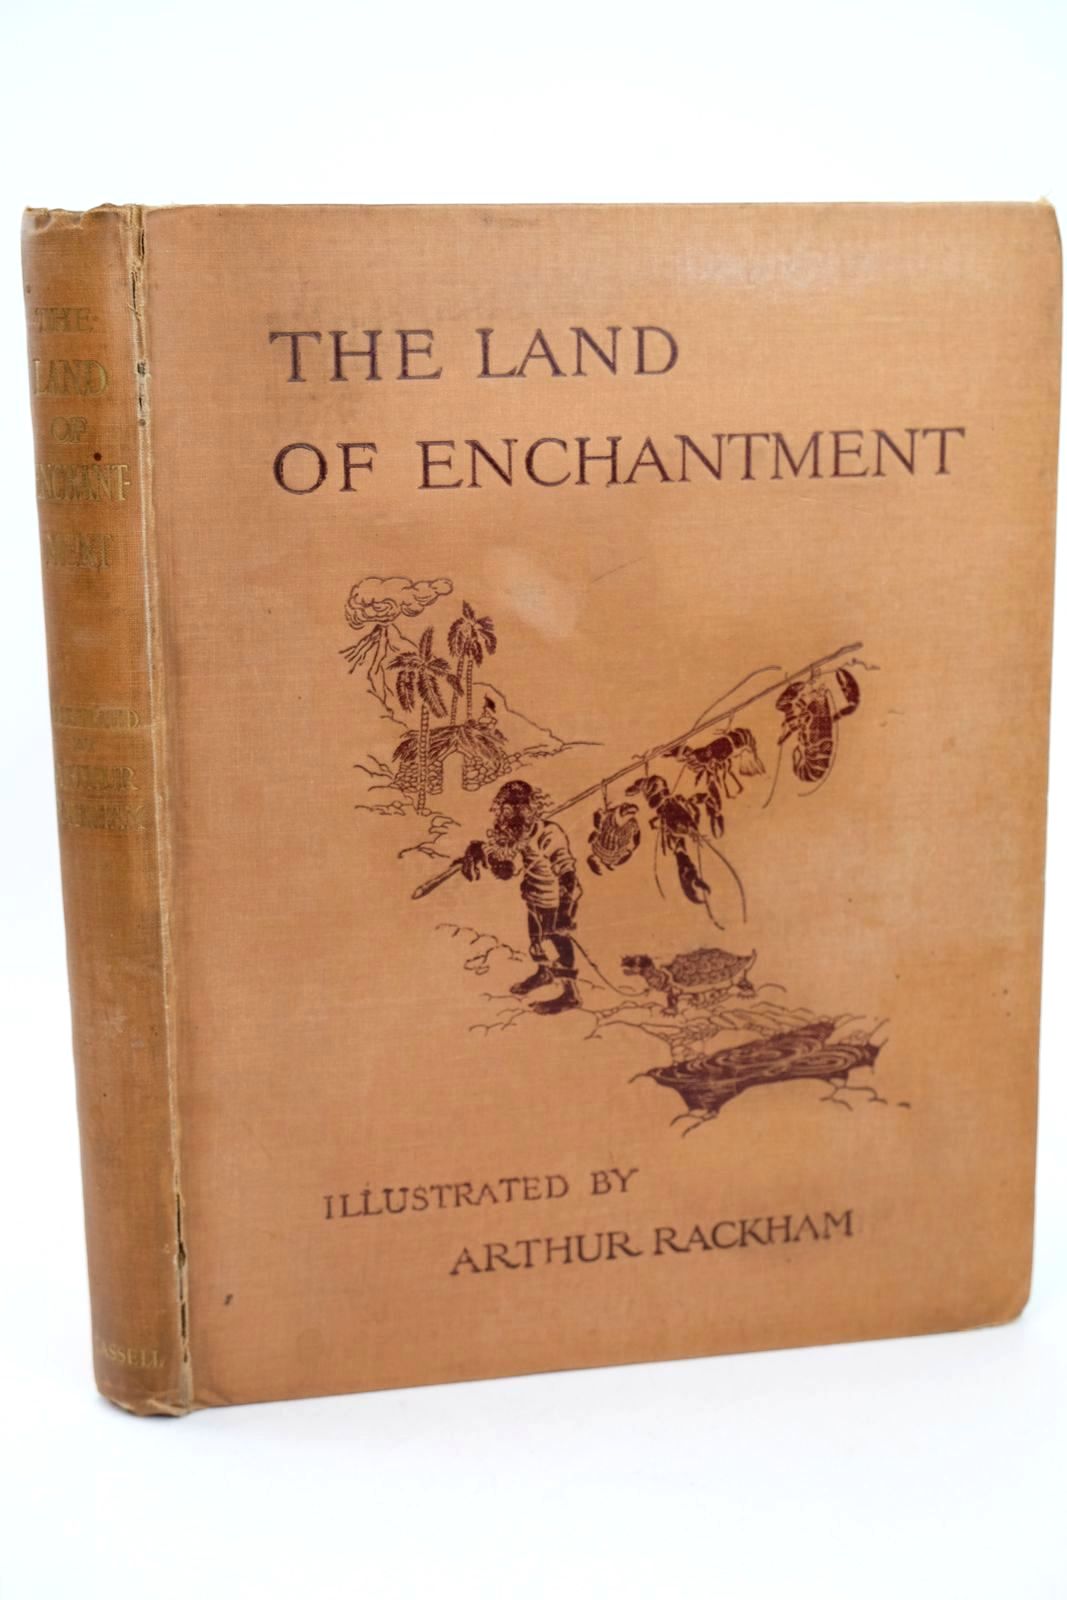 Photo of THE LAND OF ENCHANTMENT written by Bonser, A.E. Woolf, Sidney Bucheim, E.S. illustrated by Rackham, Arthur published by Cassell &amp; Co. Ltd. (STOCK CODE: 1318504)  for sale by Stella & Rose's Books